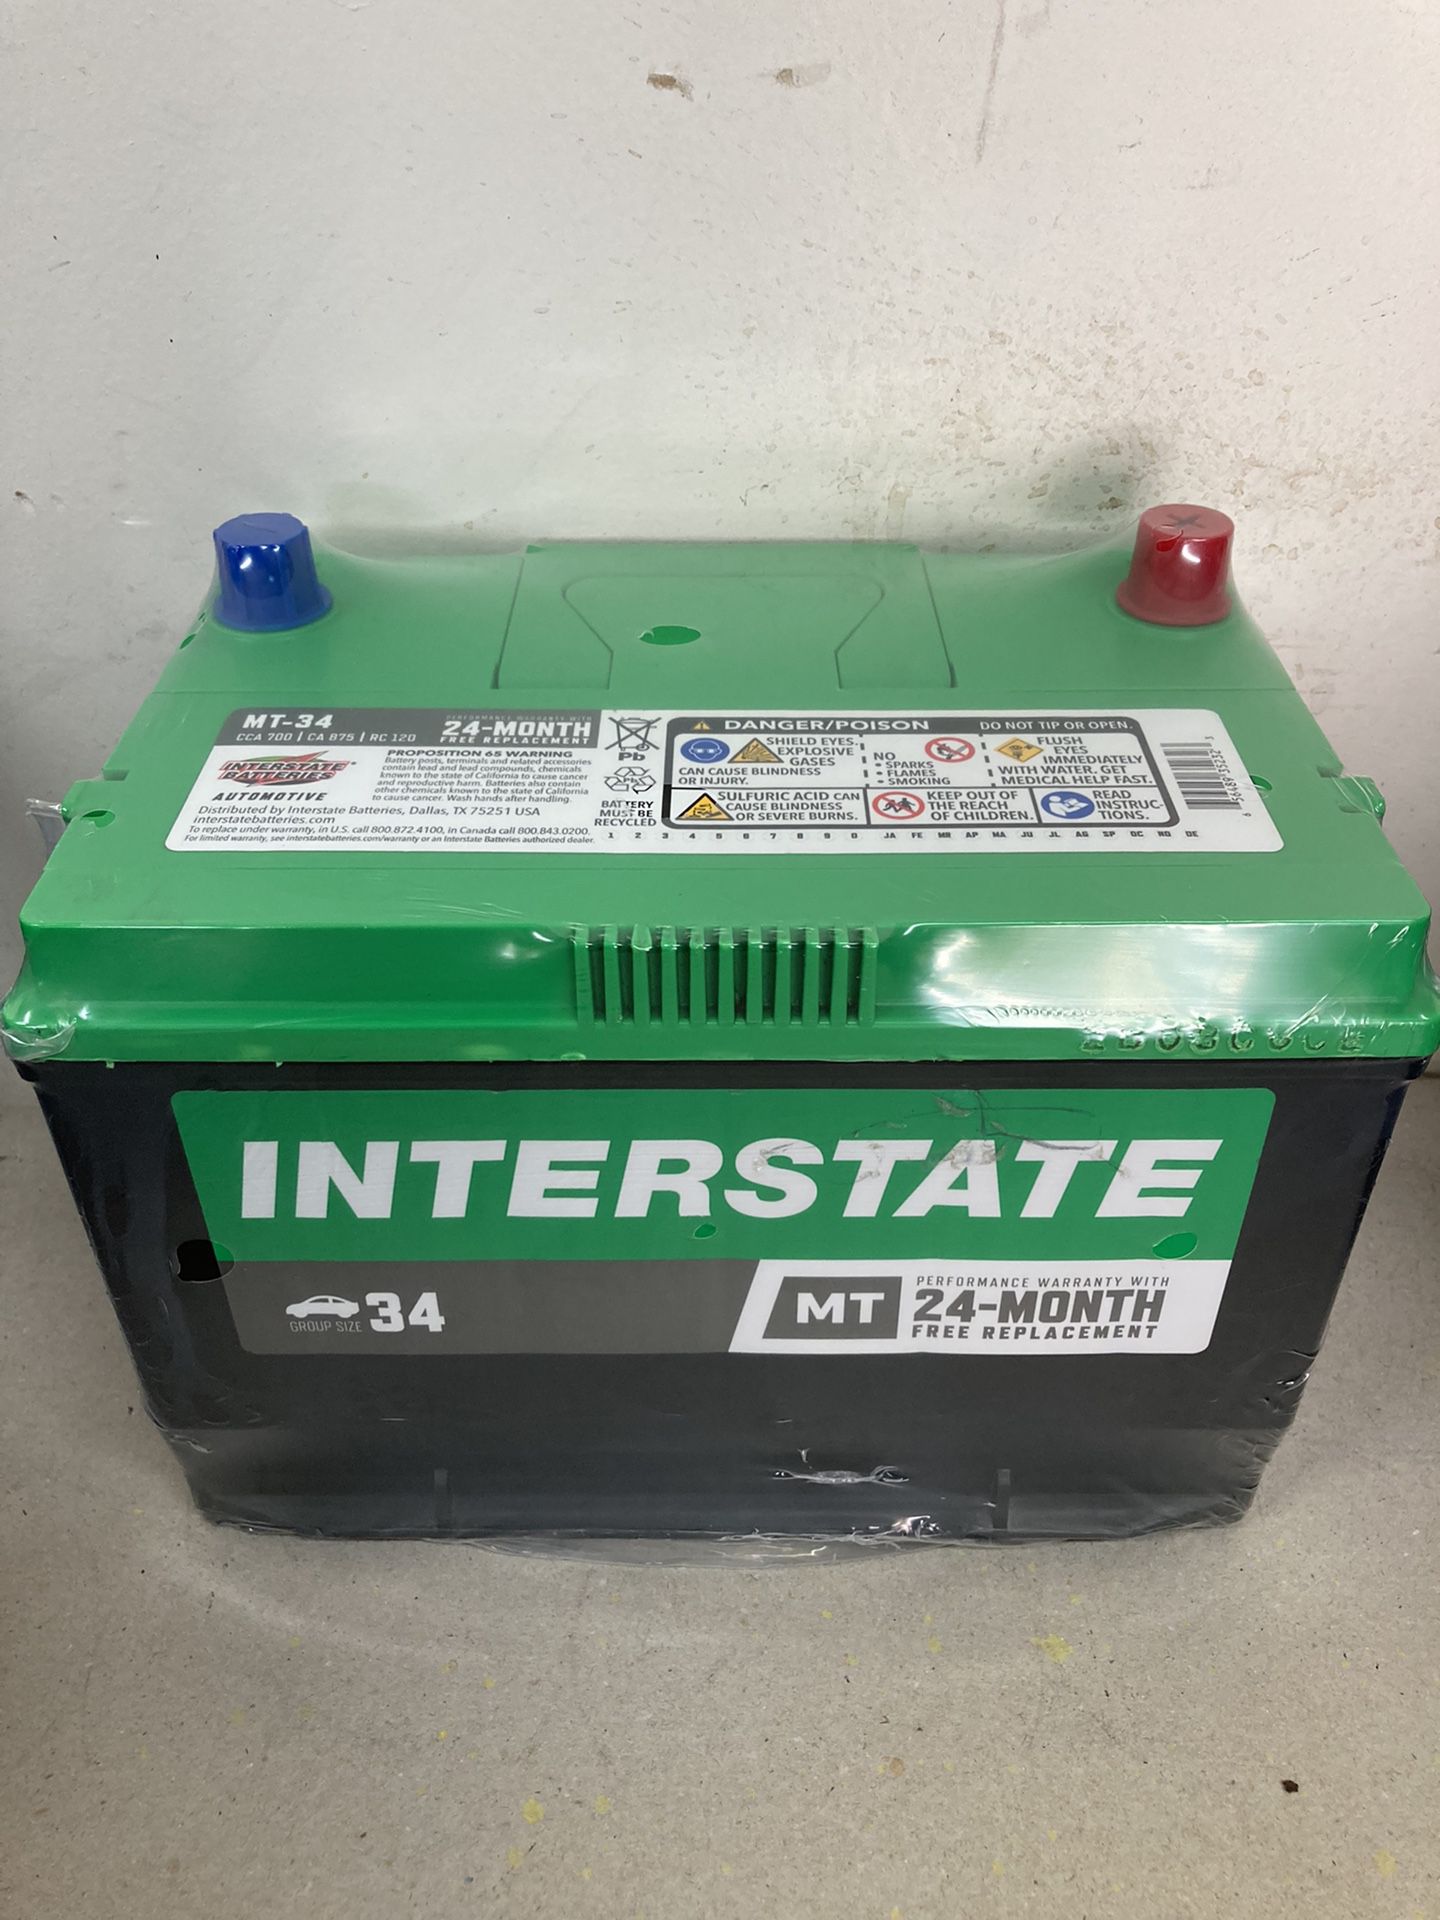 Car battery brand new interstate Megatron heavy duty performance size 34 for sale